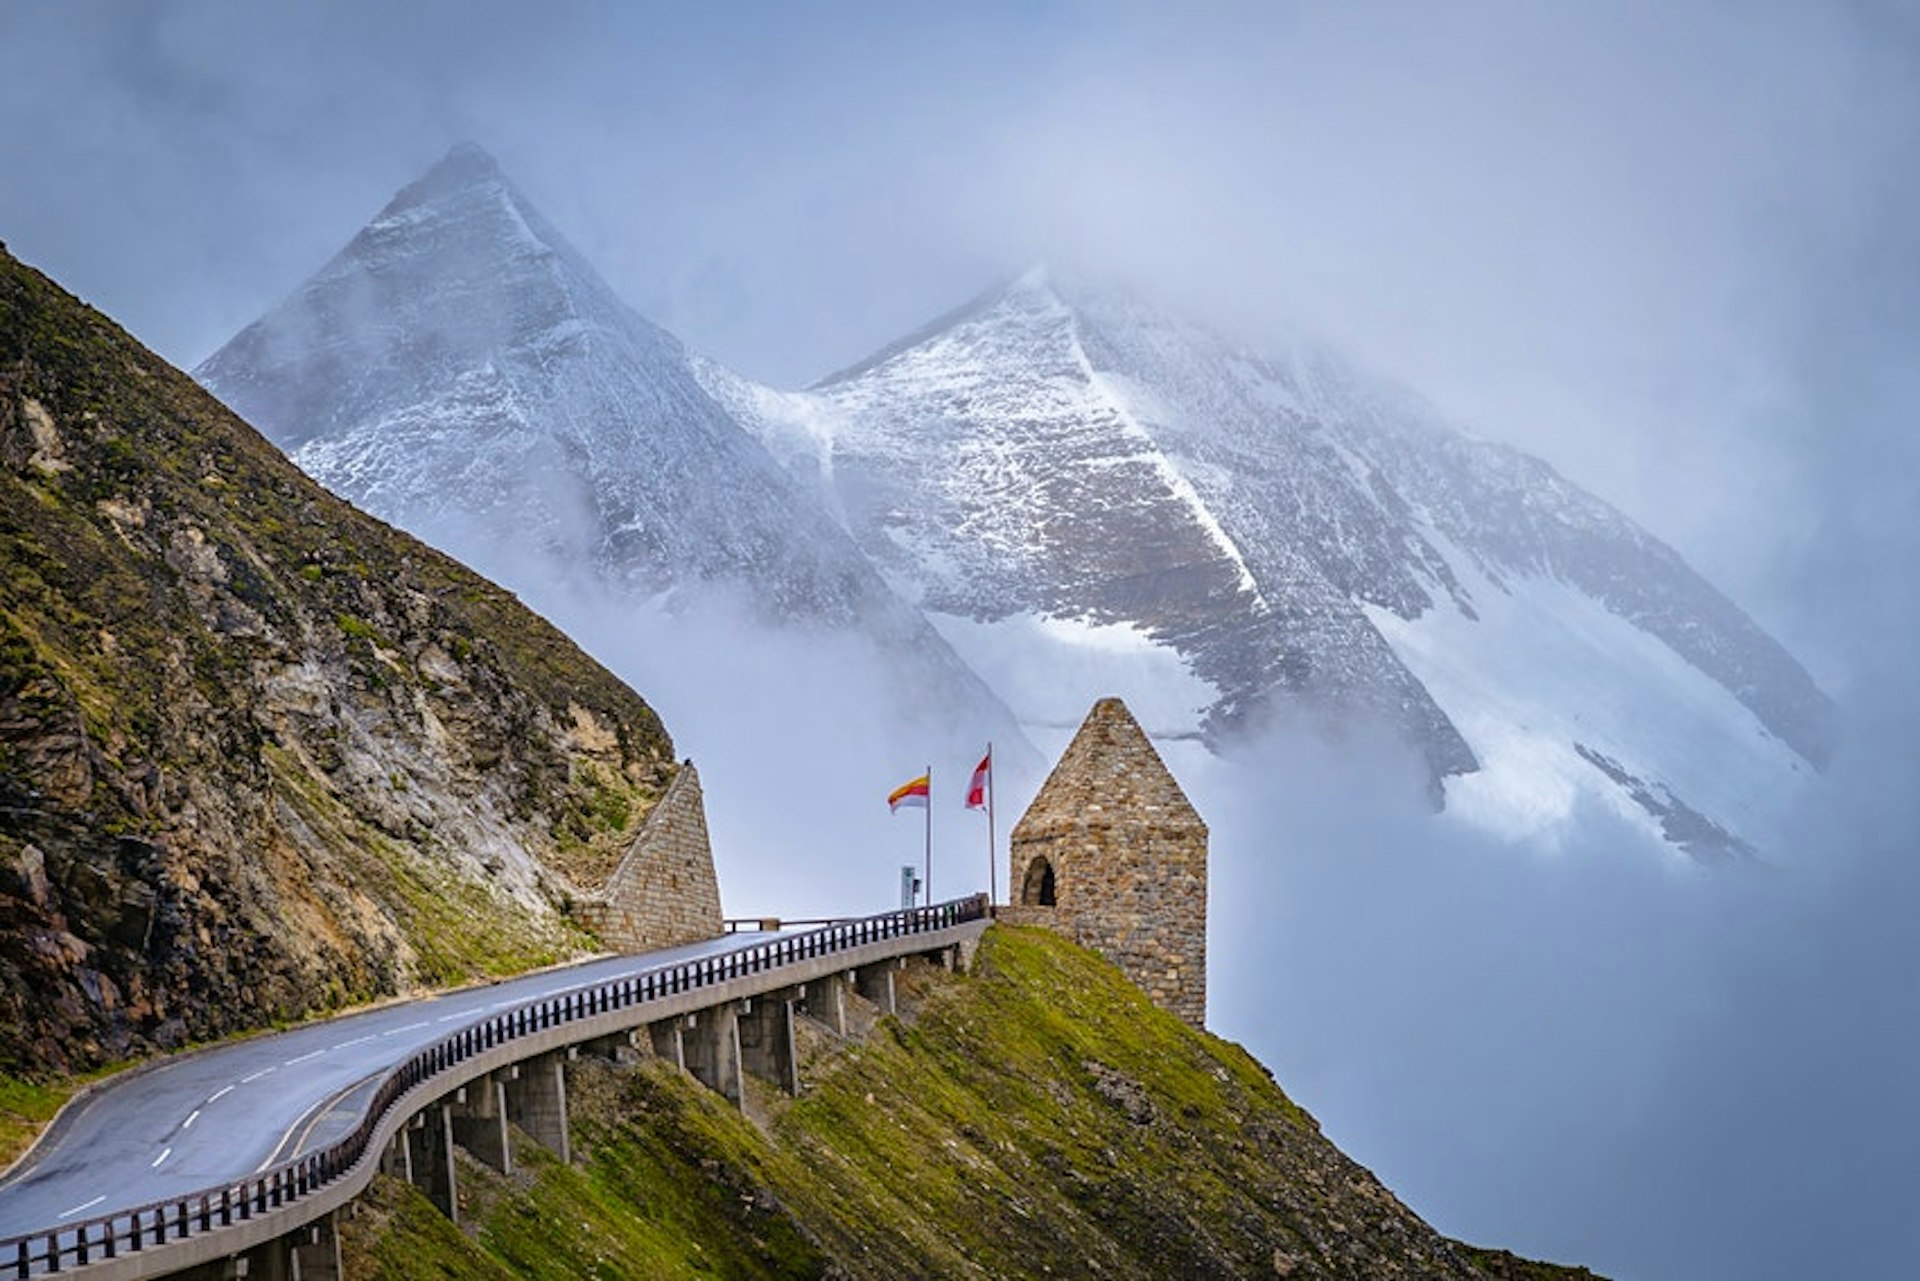 A two-lane highway along tall snow-capped mountains. There is a stone structure coming out of the side of a mountain with two flags in front of it 